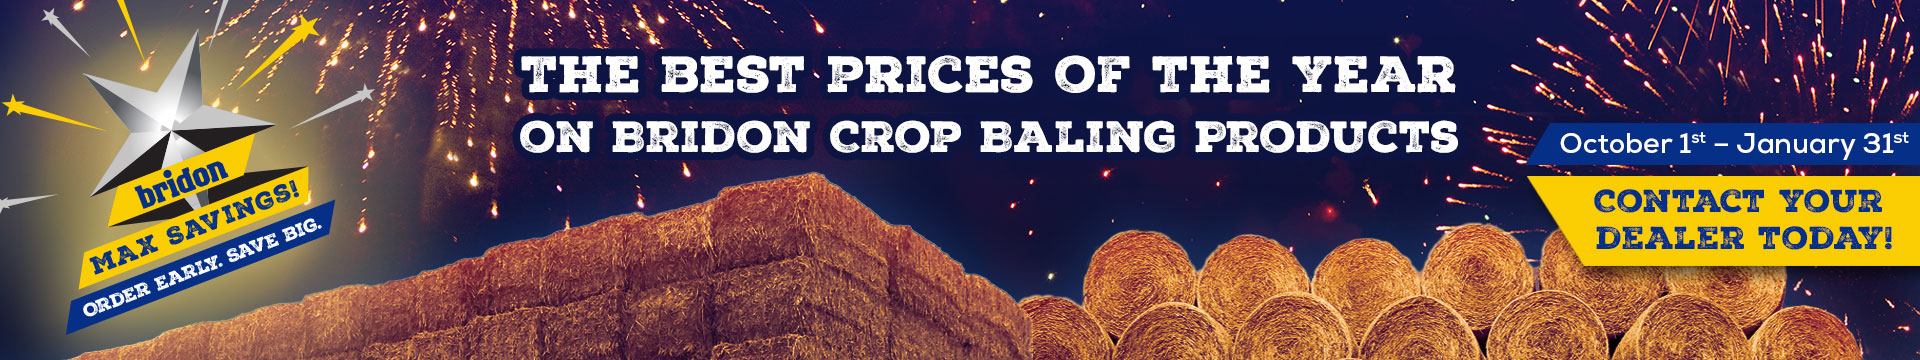 The best prices of the year on bridon crop baling products October 1st - January 31st Contact your dealer today!